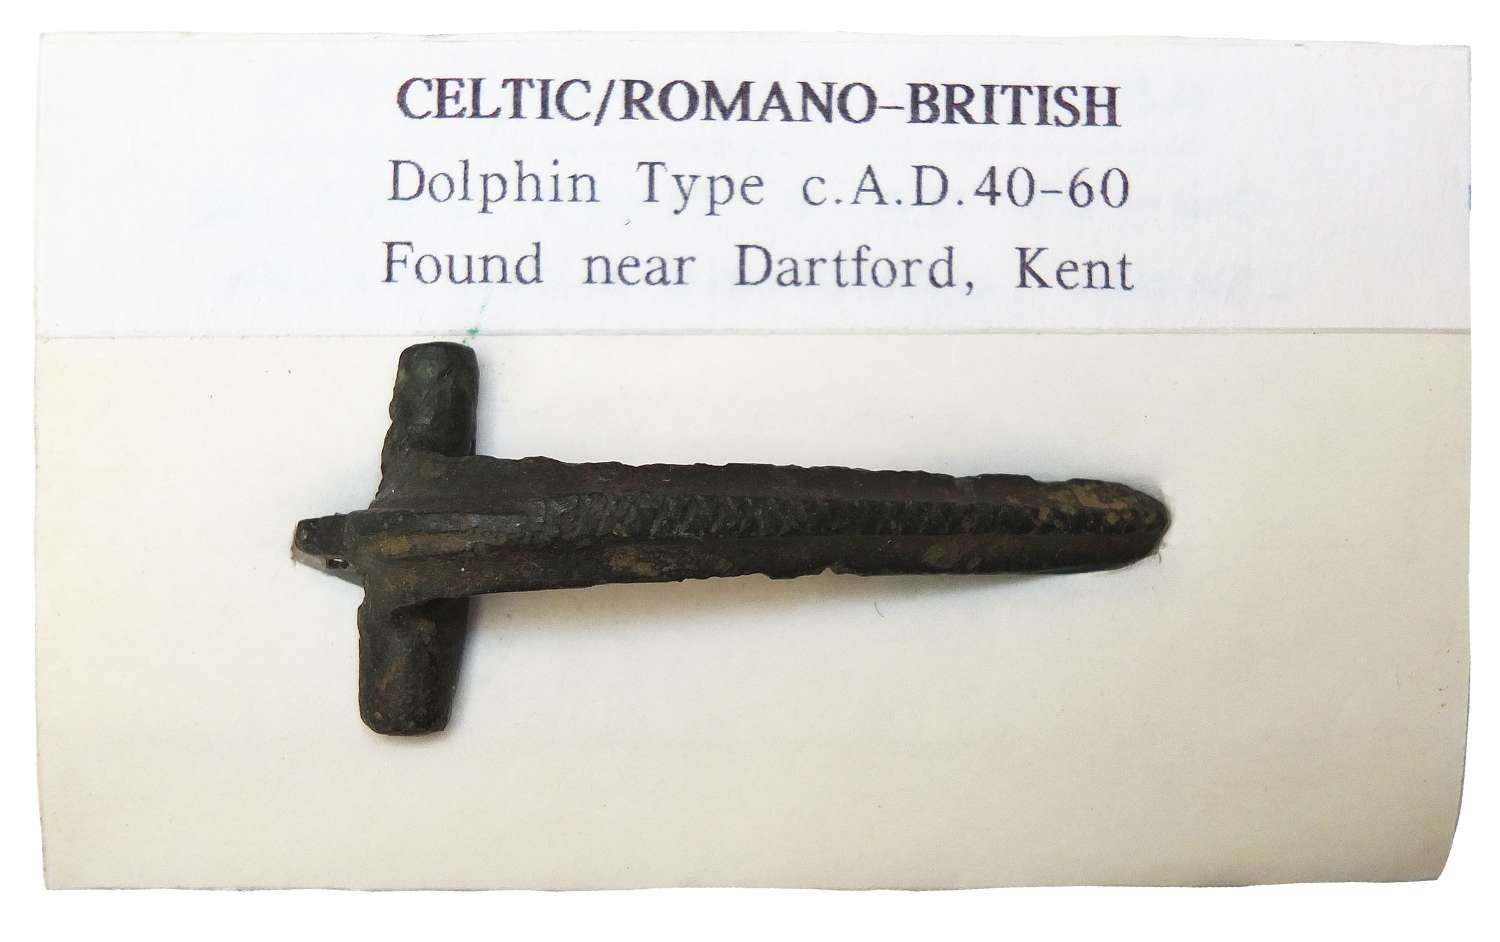 A provenanced Romano-British Dolphin type brooch, c. 40-60 A.D.